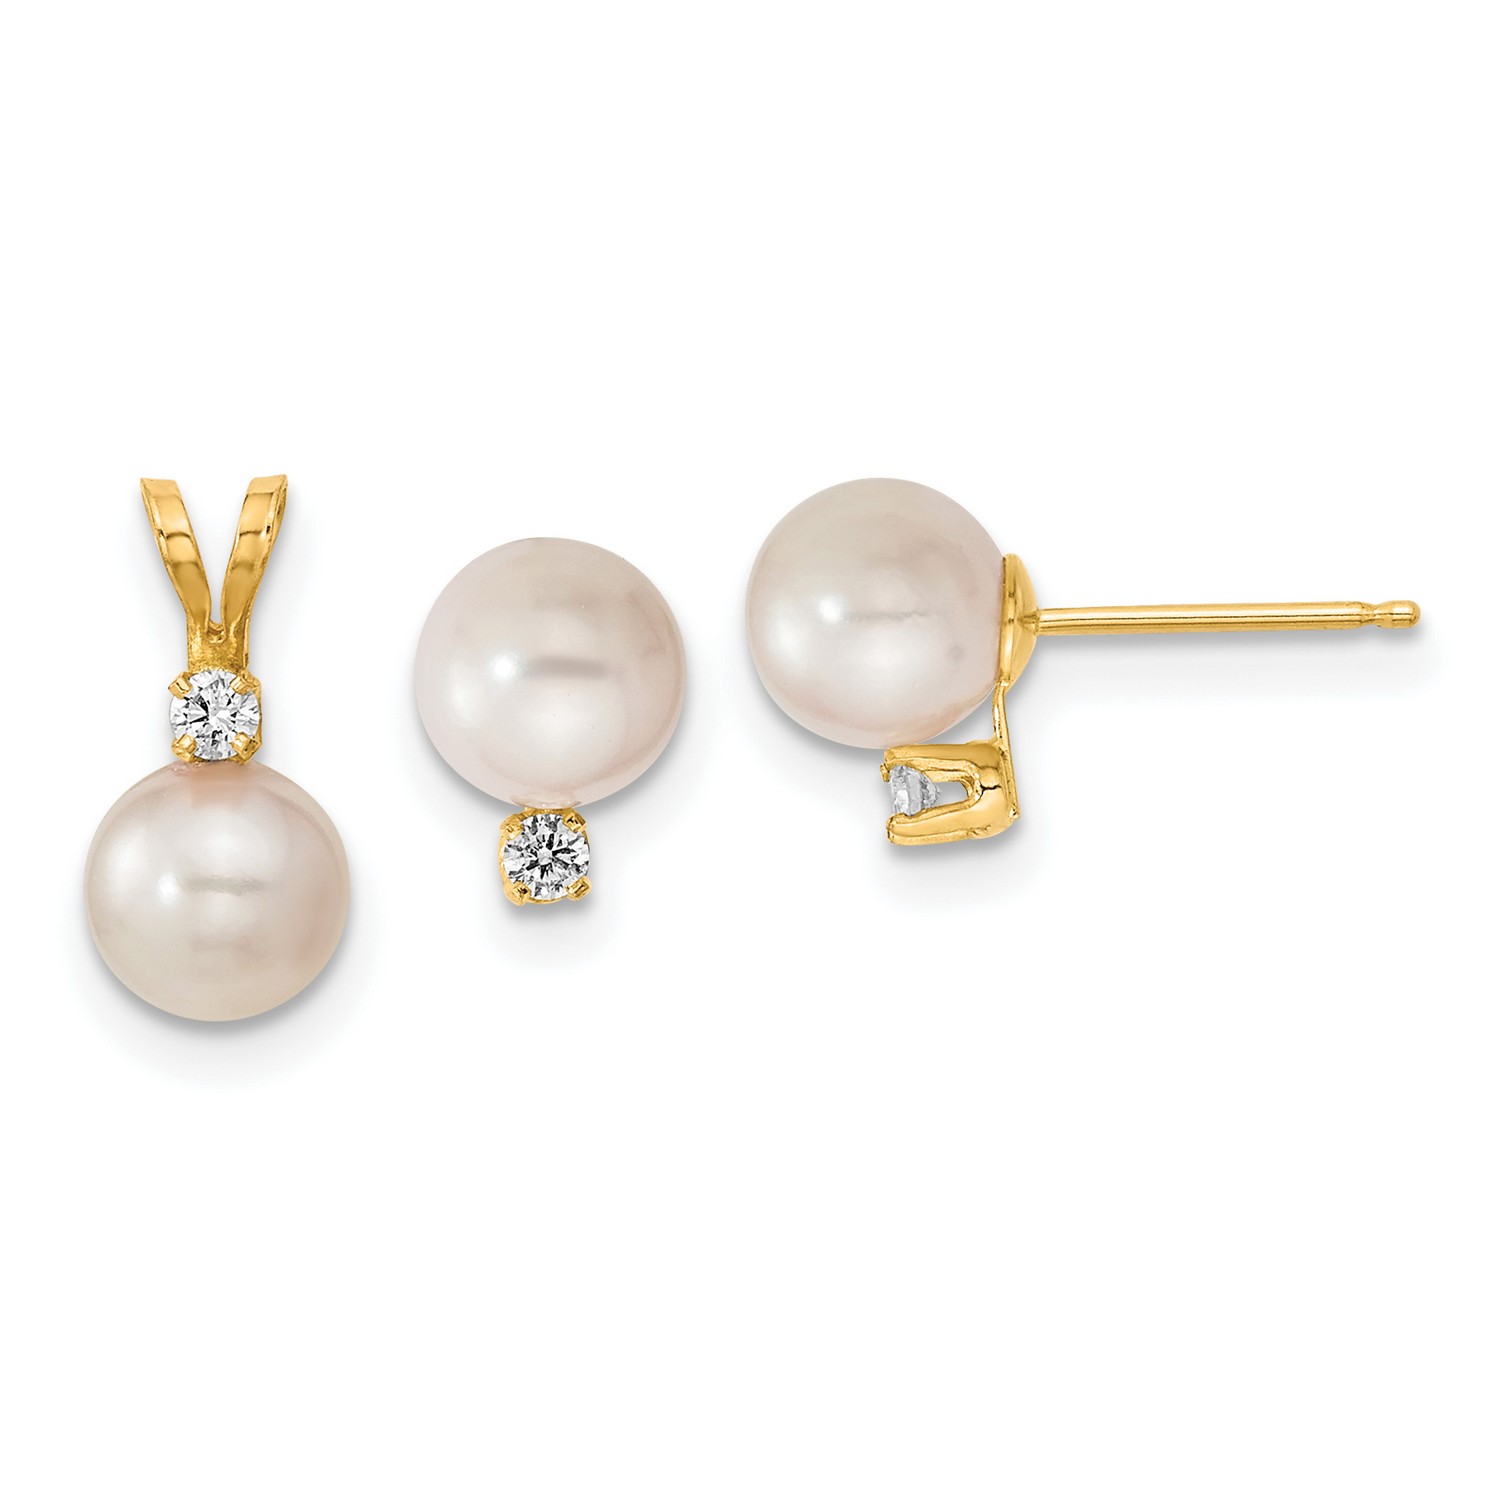 Pre-owned Jewelry Stores Network 14k Yellow Gold 6-7mm Akoya Cultured Pearl Diamond Earrings Pendant 6x6 Mm